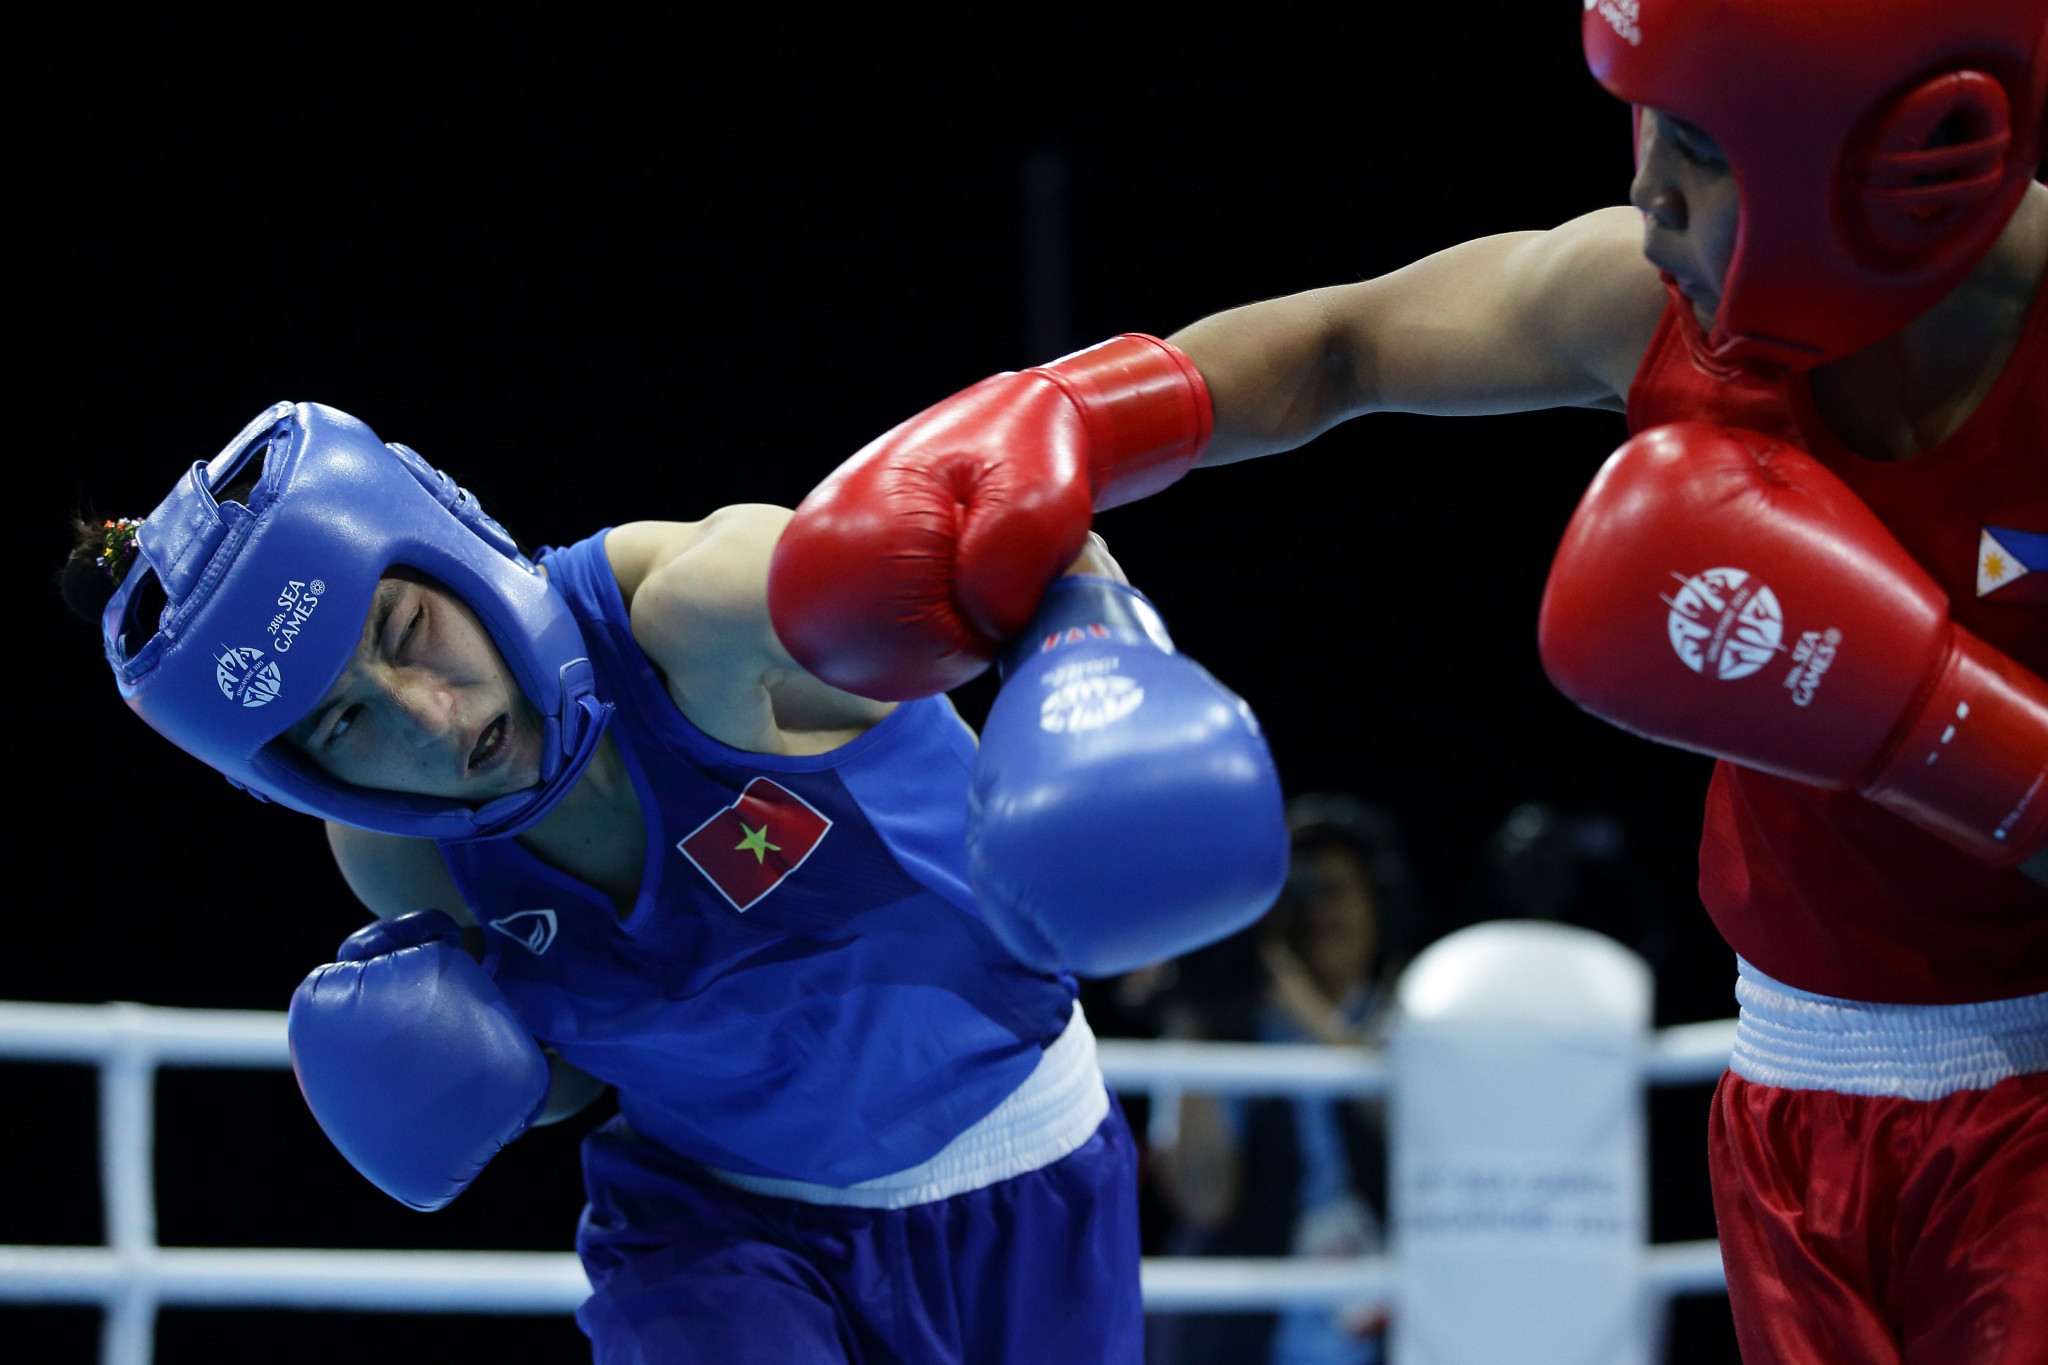 Vietnam's Bang Le Thi is through to the bantamweight semi-finals ©Getty Images